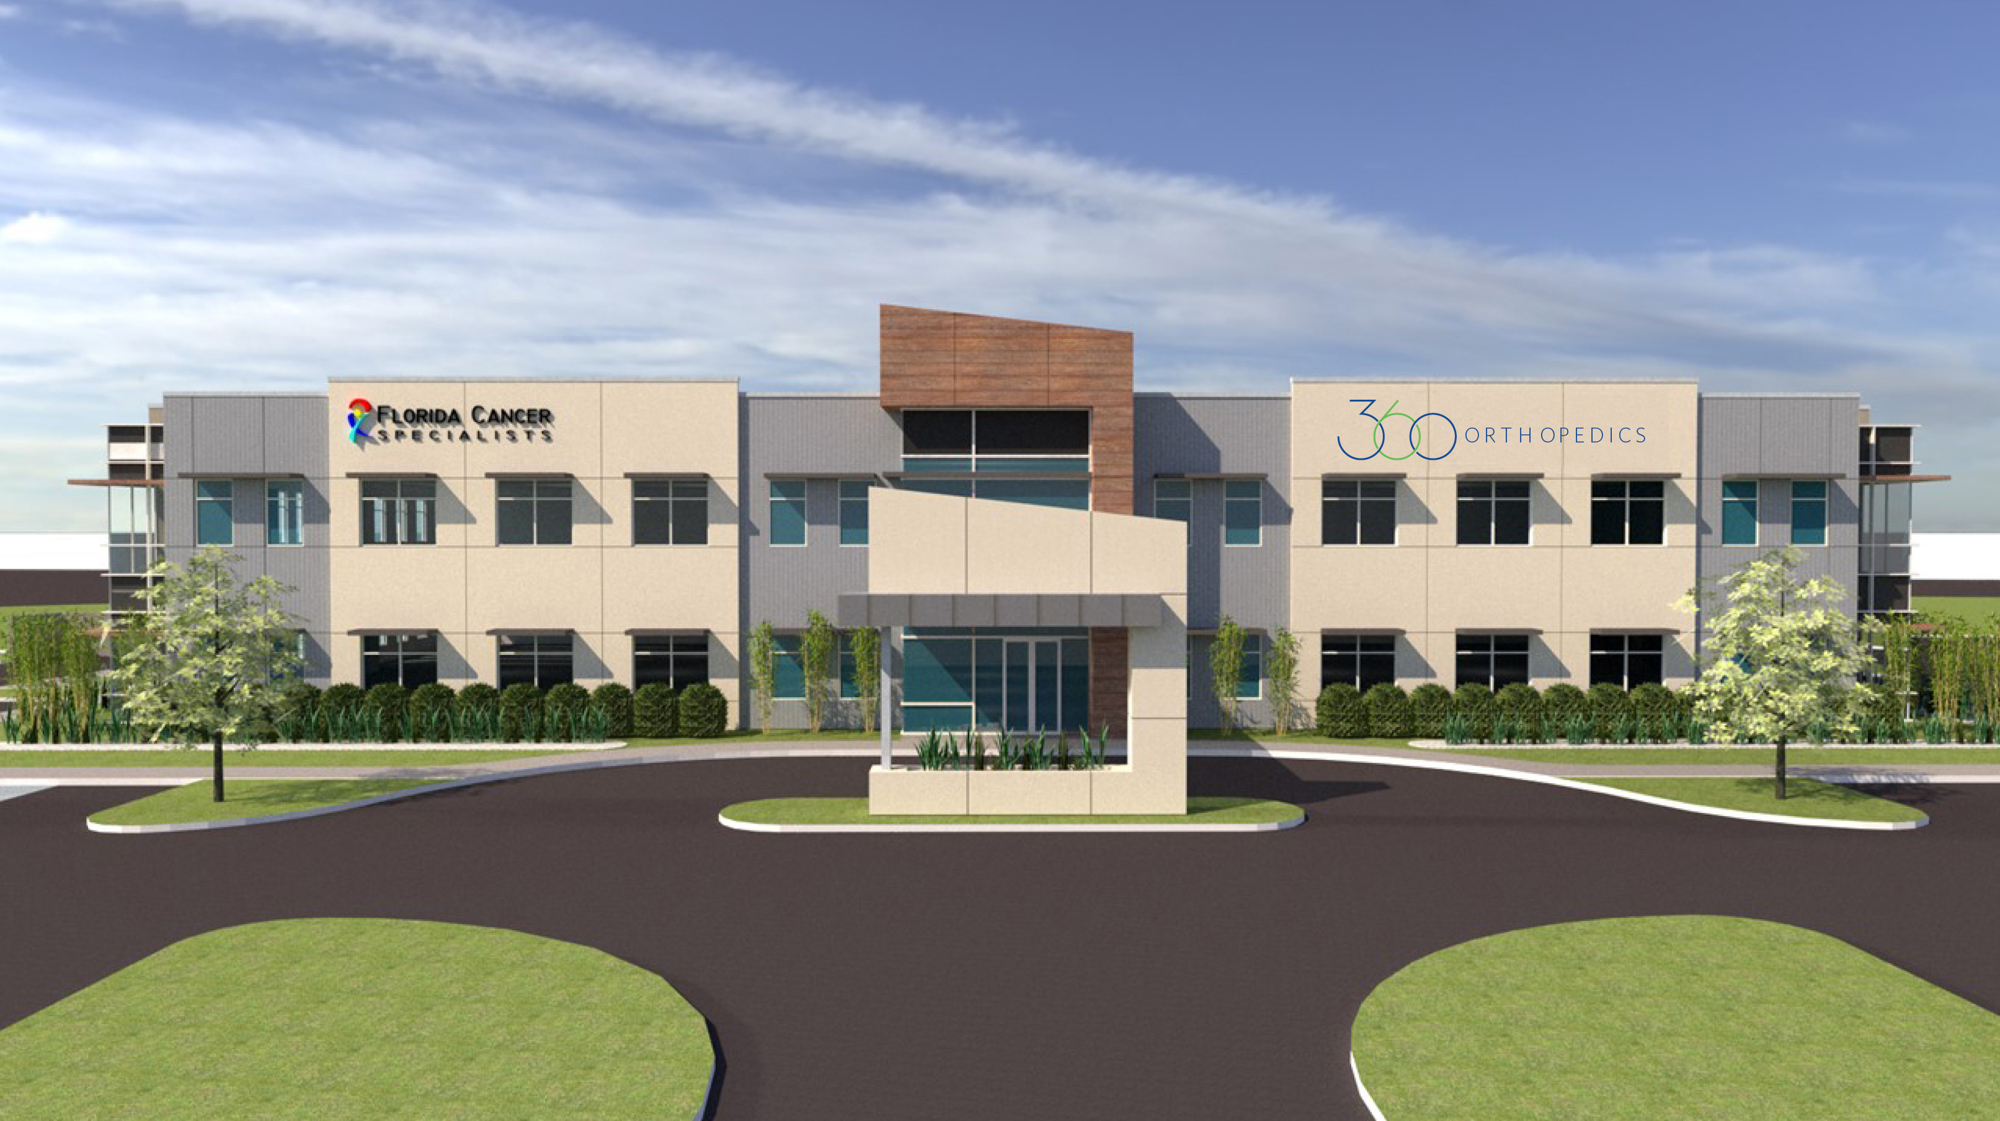 Courtesy. A new building at State Road 70 and Lakewood Ranch Boulevard will be home to 360 Orthopedics' new office in Lakewood Ranch. It's currently under construction and expected to open Nov. 1.